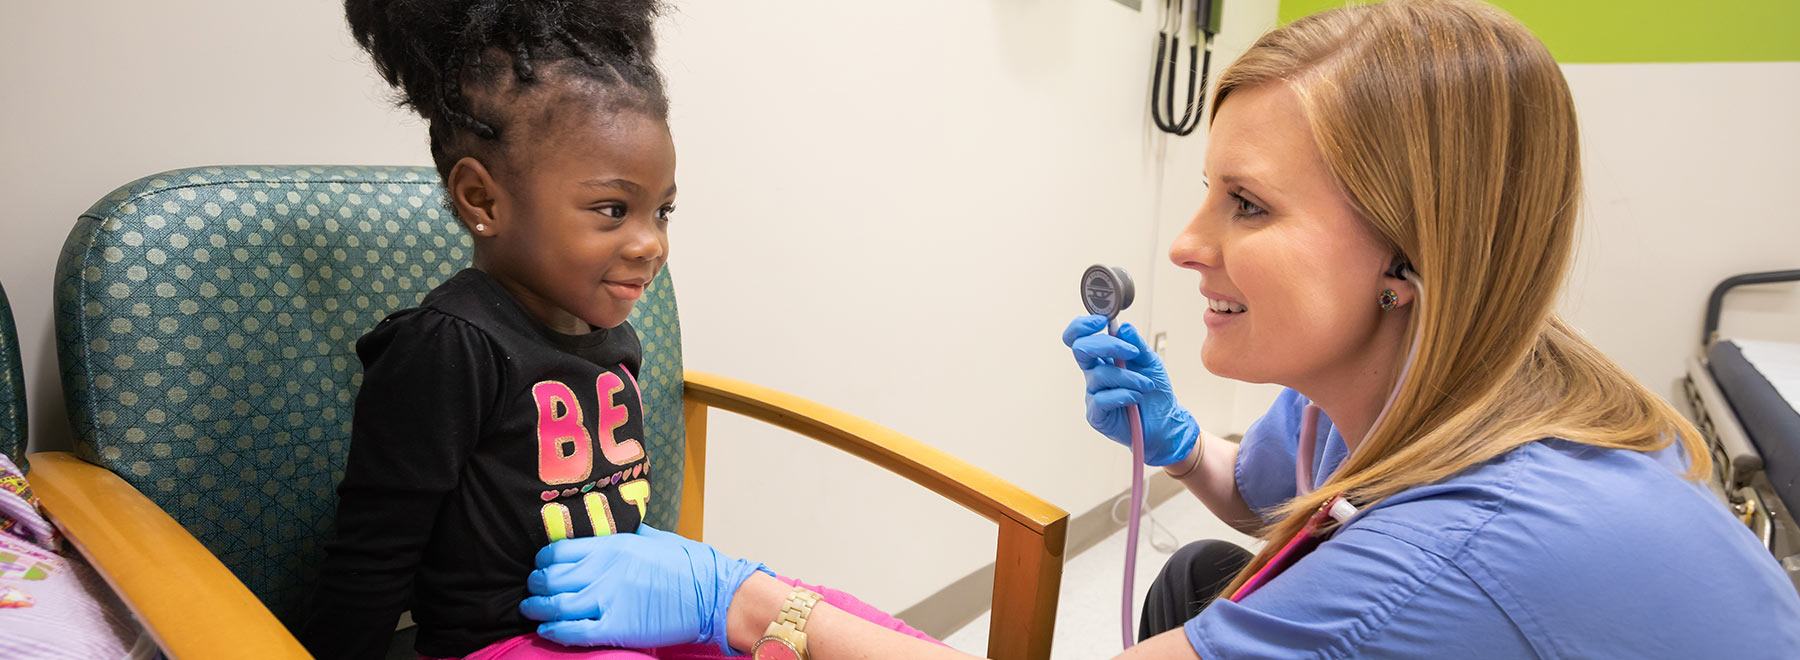 Patient Janiya Pate of Jackson smiles as nurse Leigh Moreau checks her stomach during a visit to the Pediatric Fast Track.